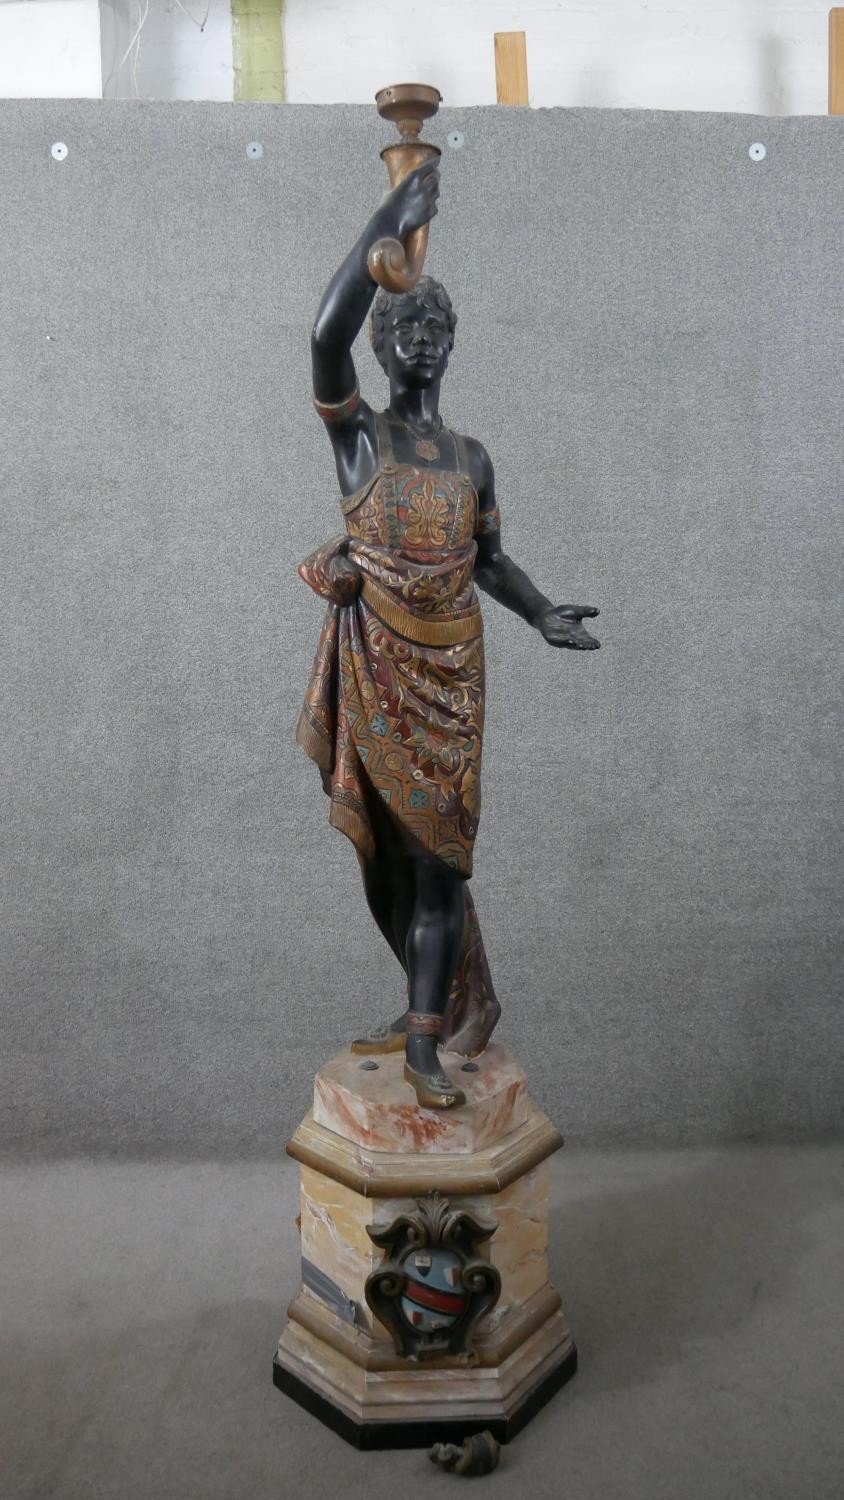 A 20th Century Italian style blackamore figure, formerly a candelabrum.